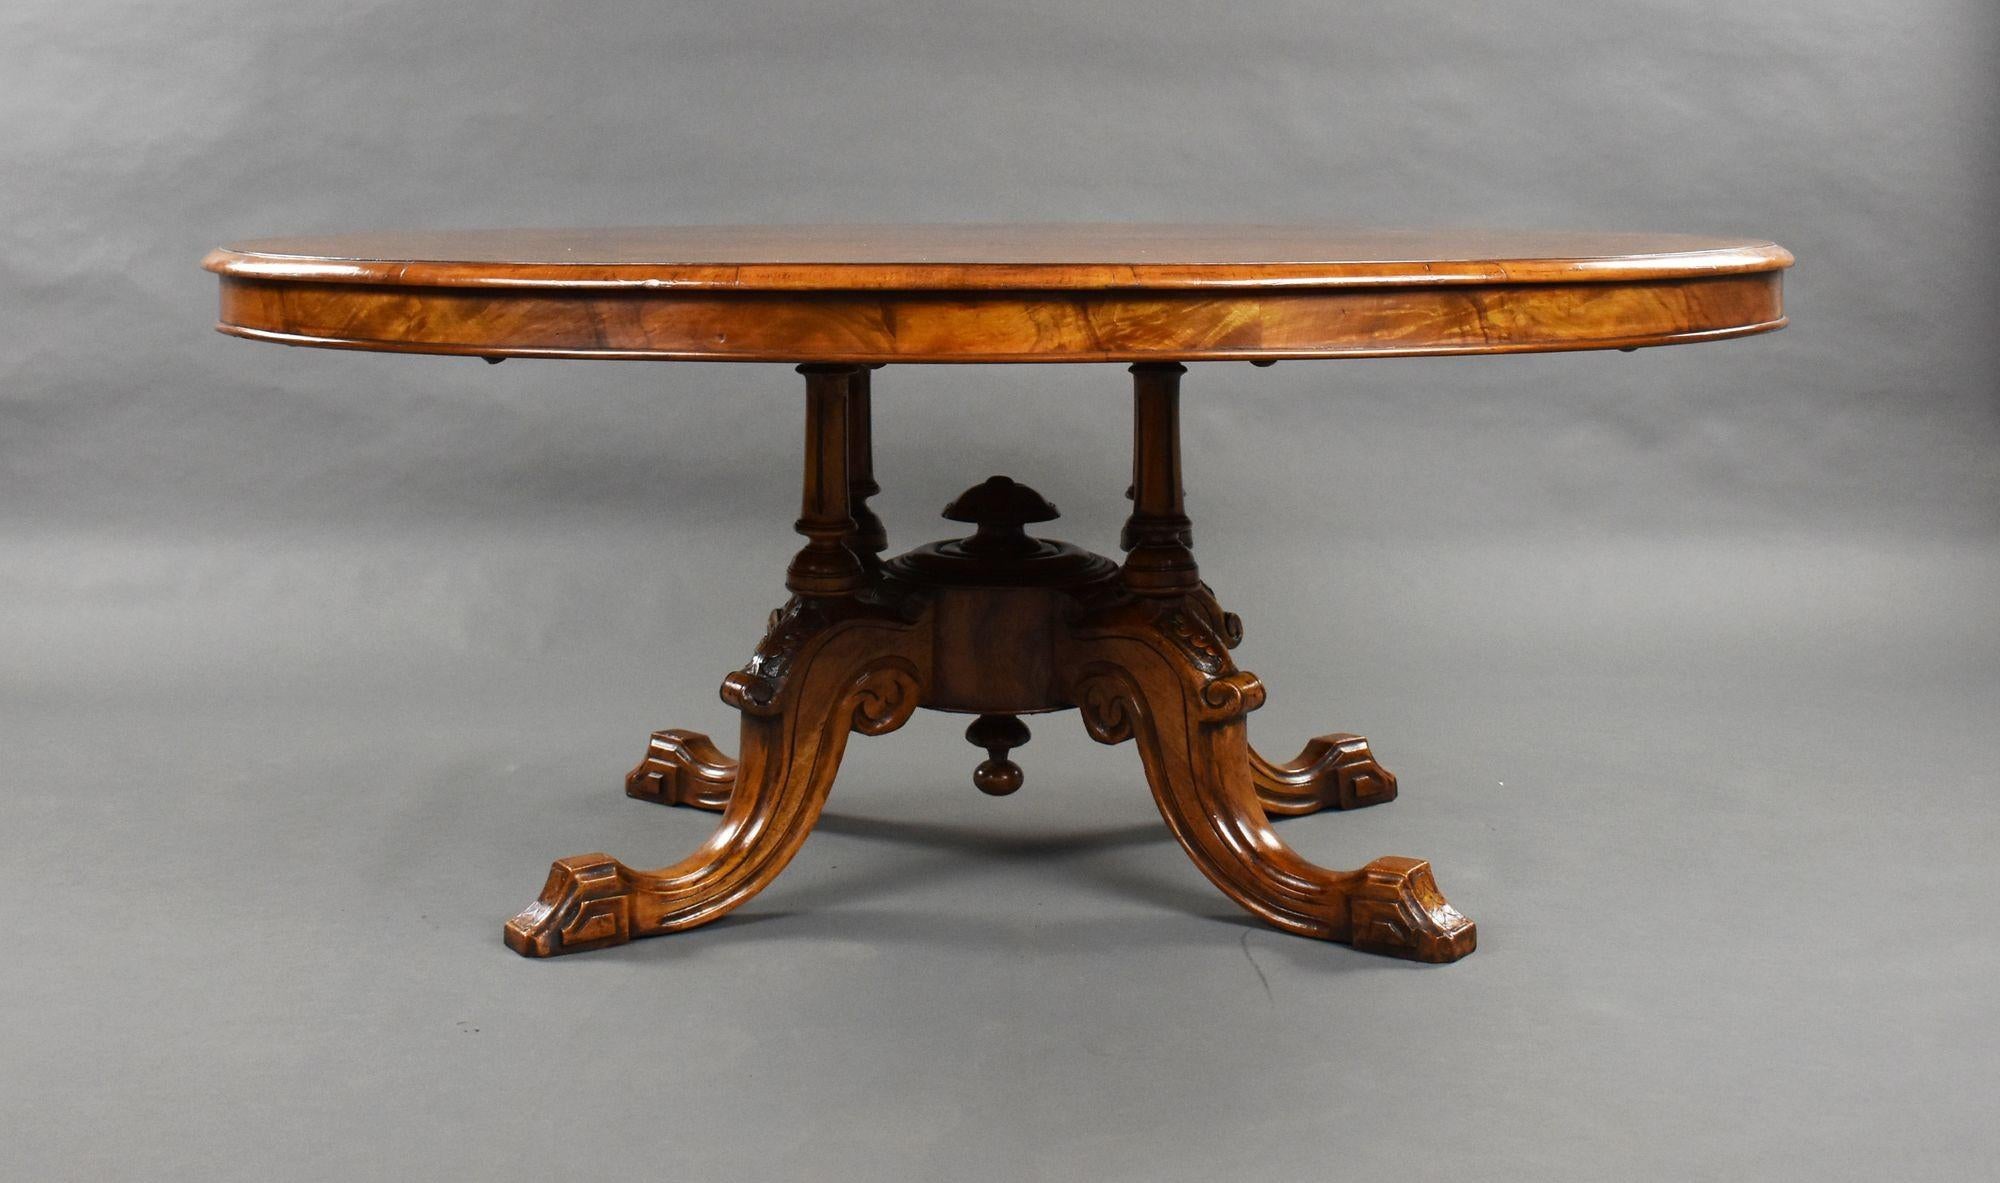 For sale is a good quality Victorian burr walnut oval coffee table, having an inlaid top, above a birdcage base, raised on elegantly carved legs. The table is in very good condition for its age.
Width: 133cm Depth: 100cm Height: 54cm